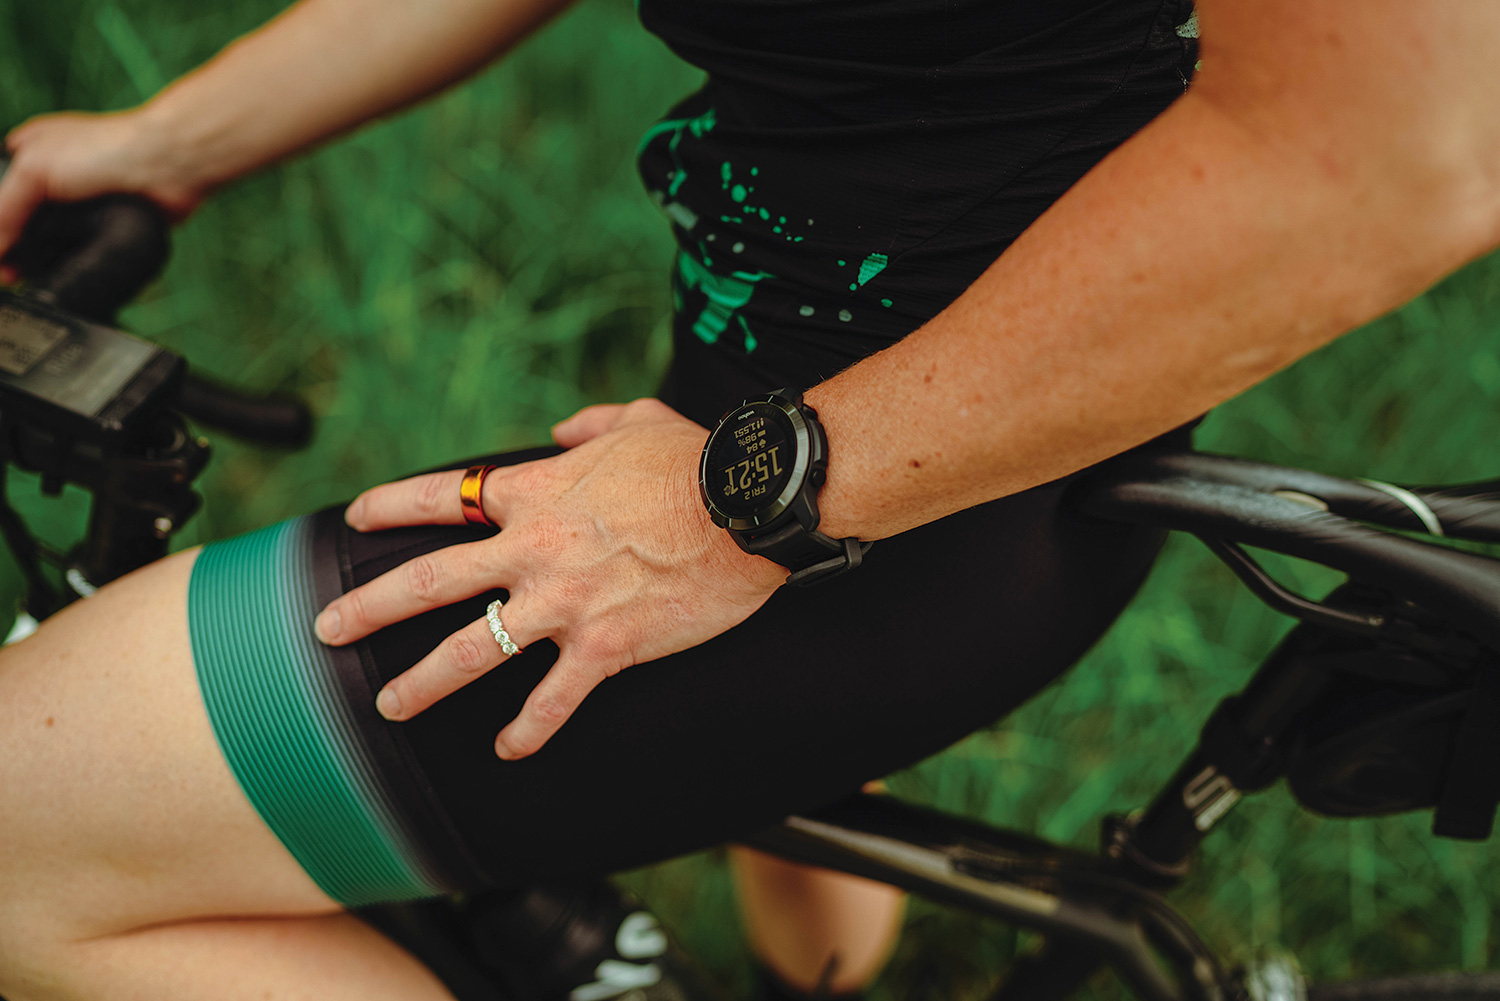 Hannah Parish is a passionate cyclist. She feels wearable tech has the ability to help us live longer and better. She wears a continuous glucose monitor, which offers real-time feedback about sports nutrition.